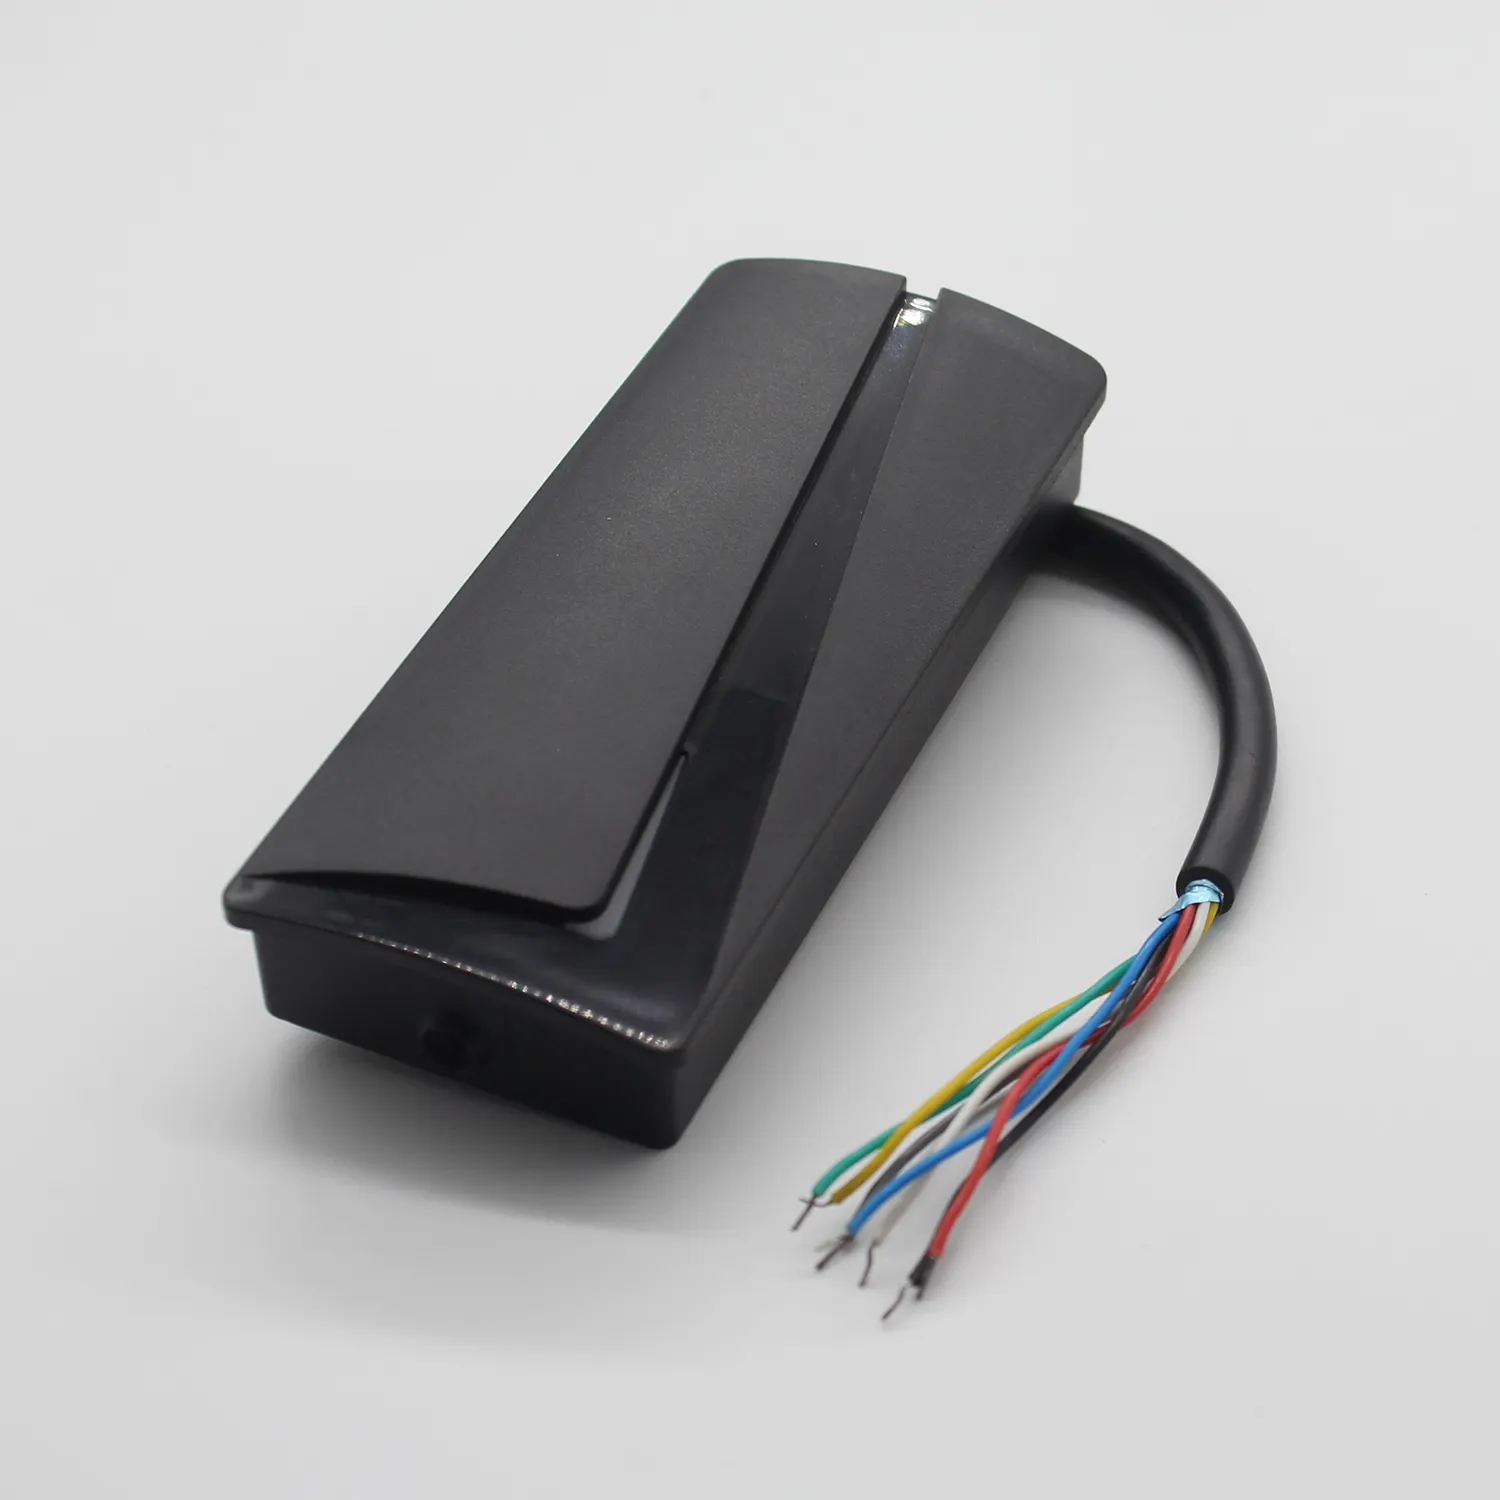 Waterproof rfid access control card reader reading 125Khz em id tags 13.56mhz MF1K for optional